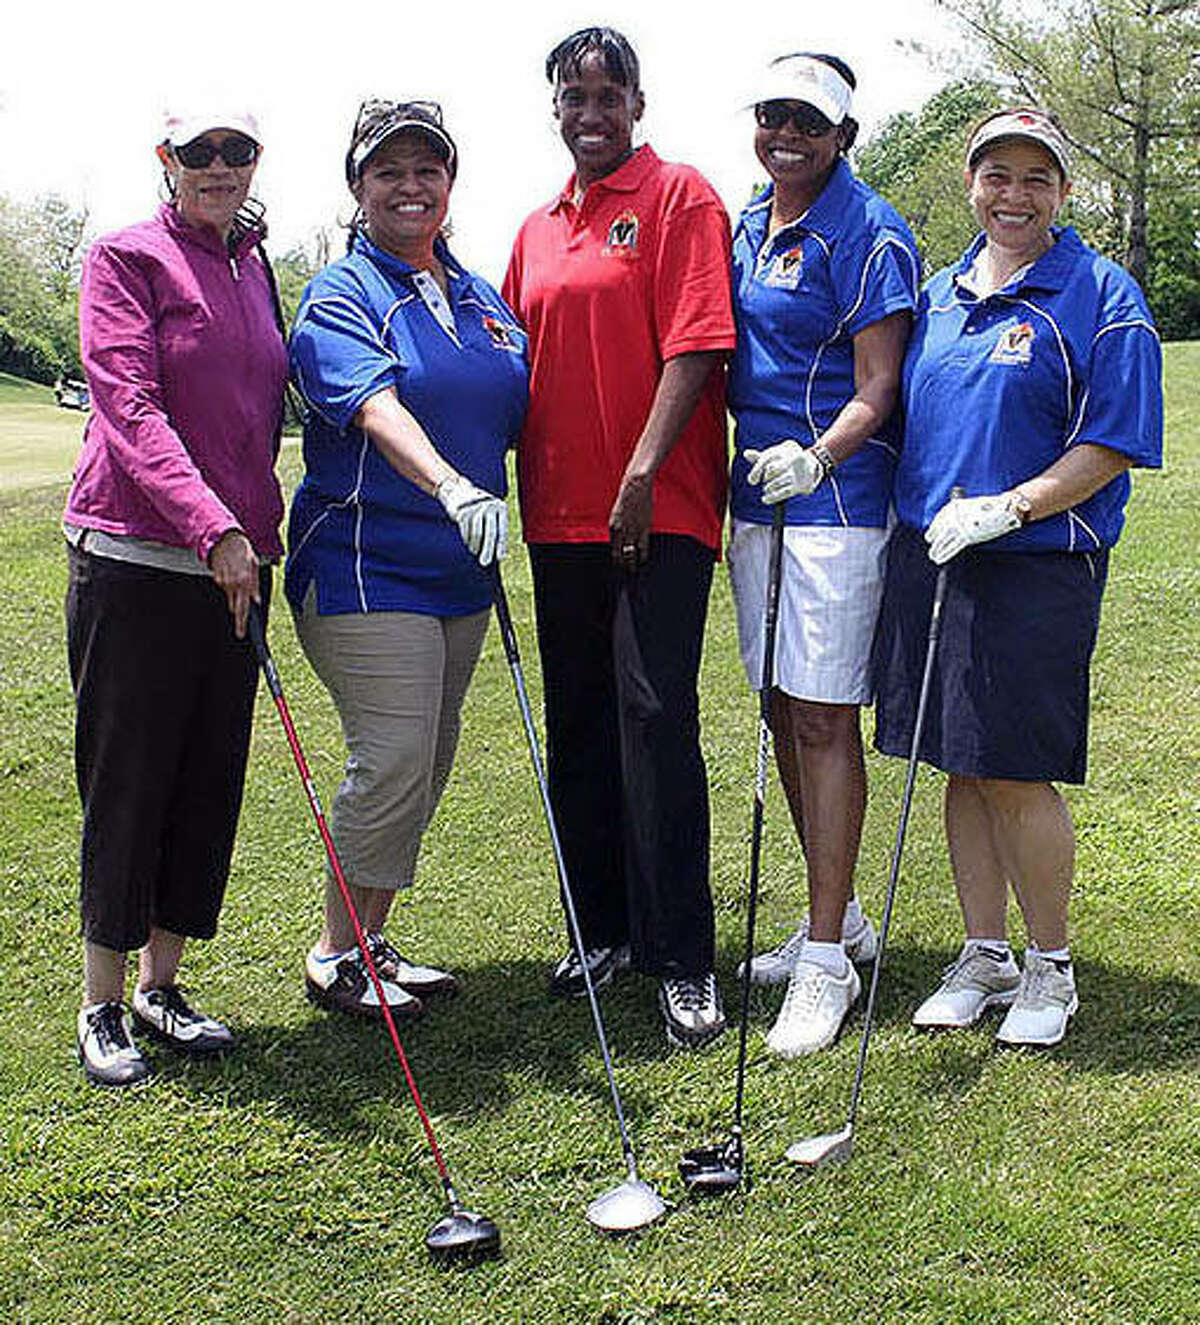 From left to right are Mona Smith, Alisa Warren, Jackie Joyner-Kersee, Myrtle Dickson and Michelle Sherod.